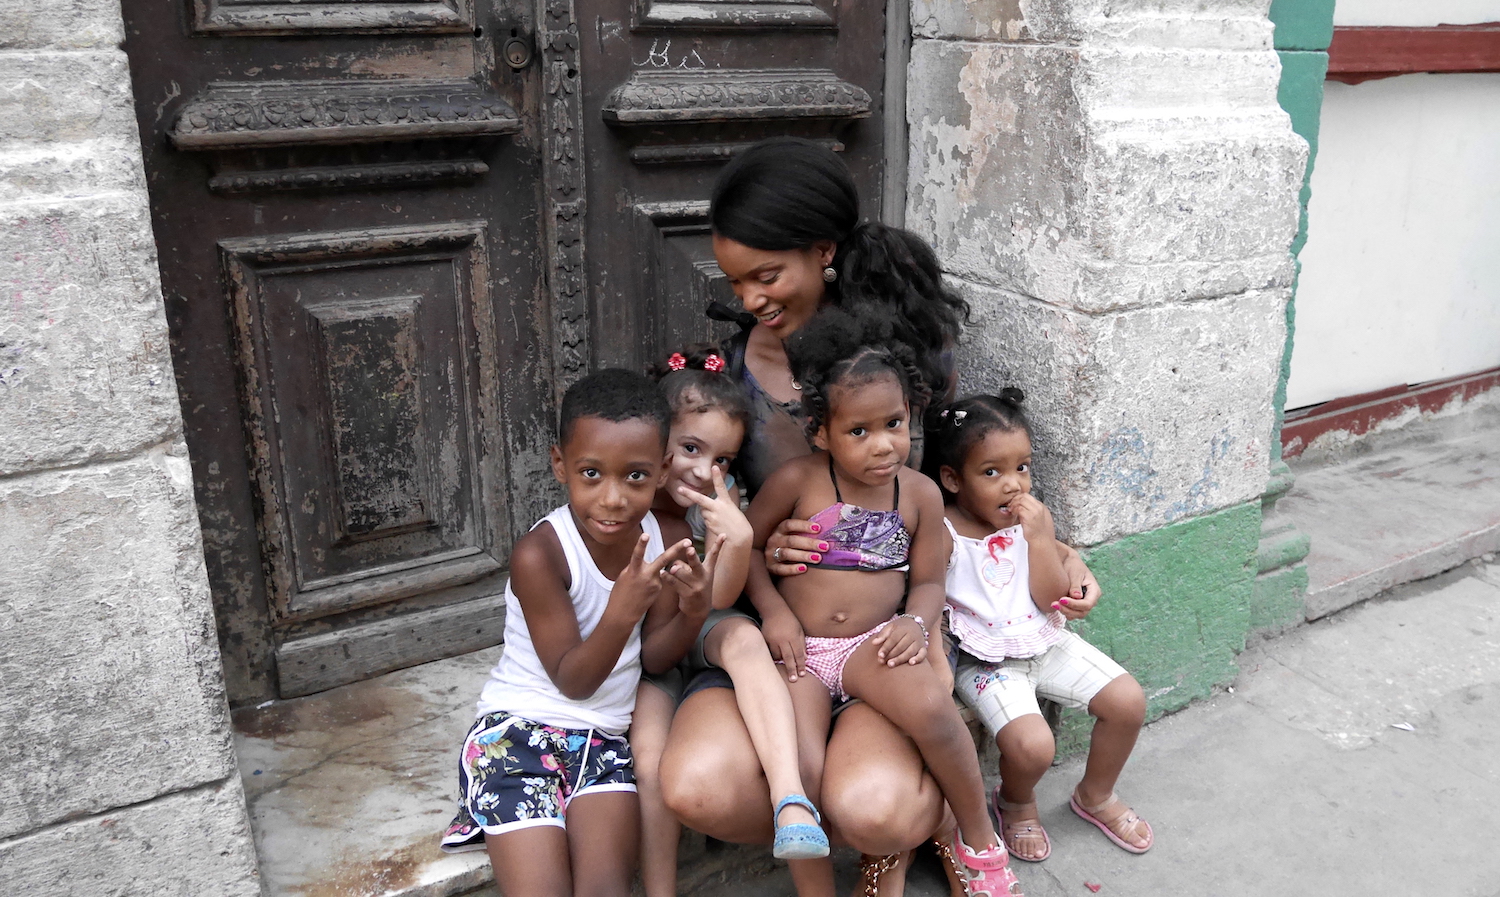 With some beautiful Cuban children